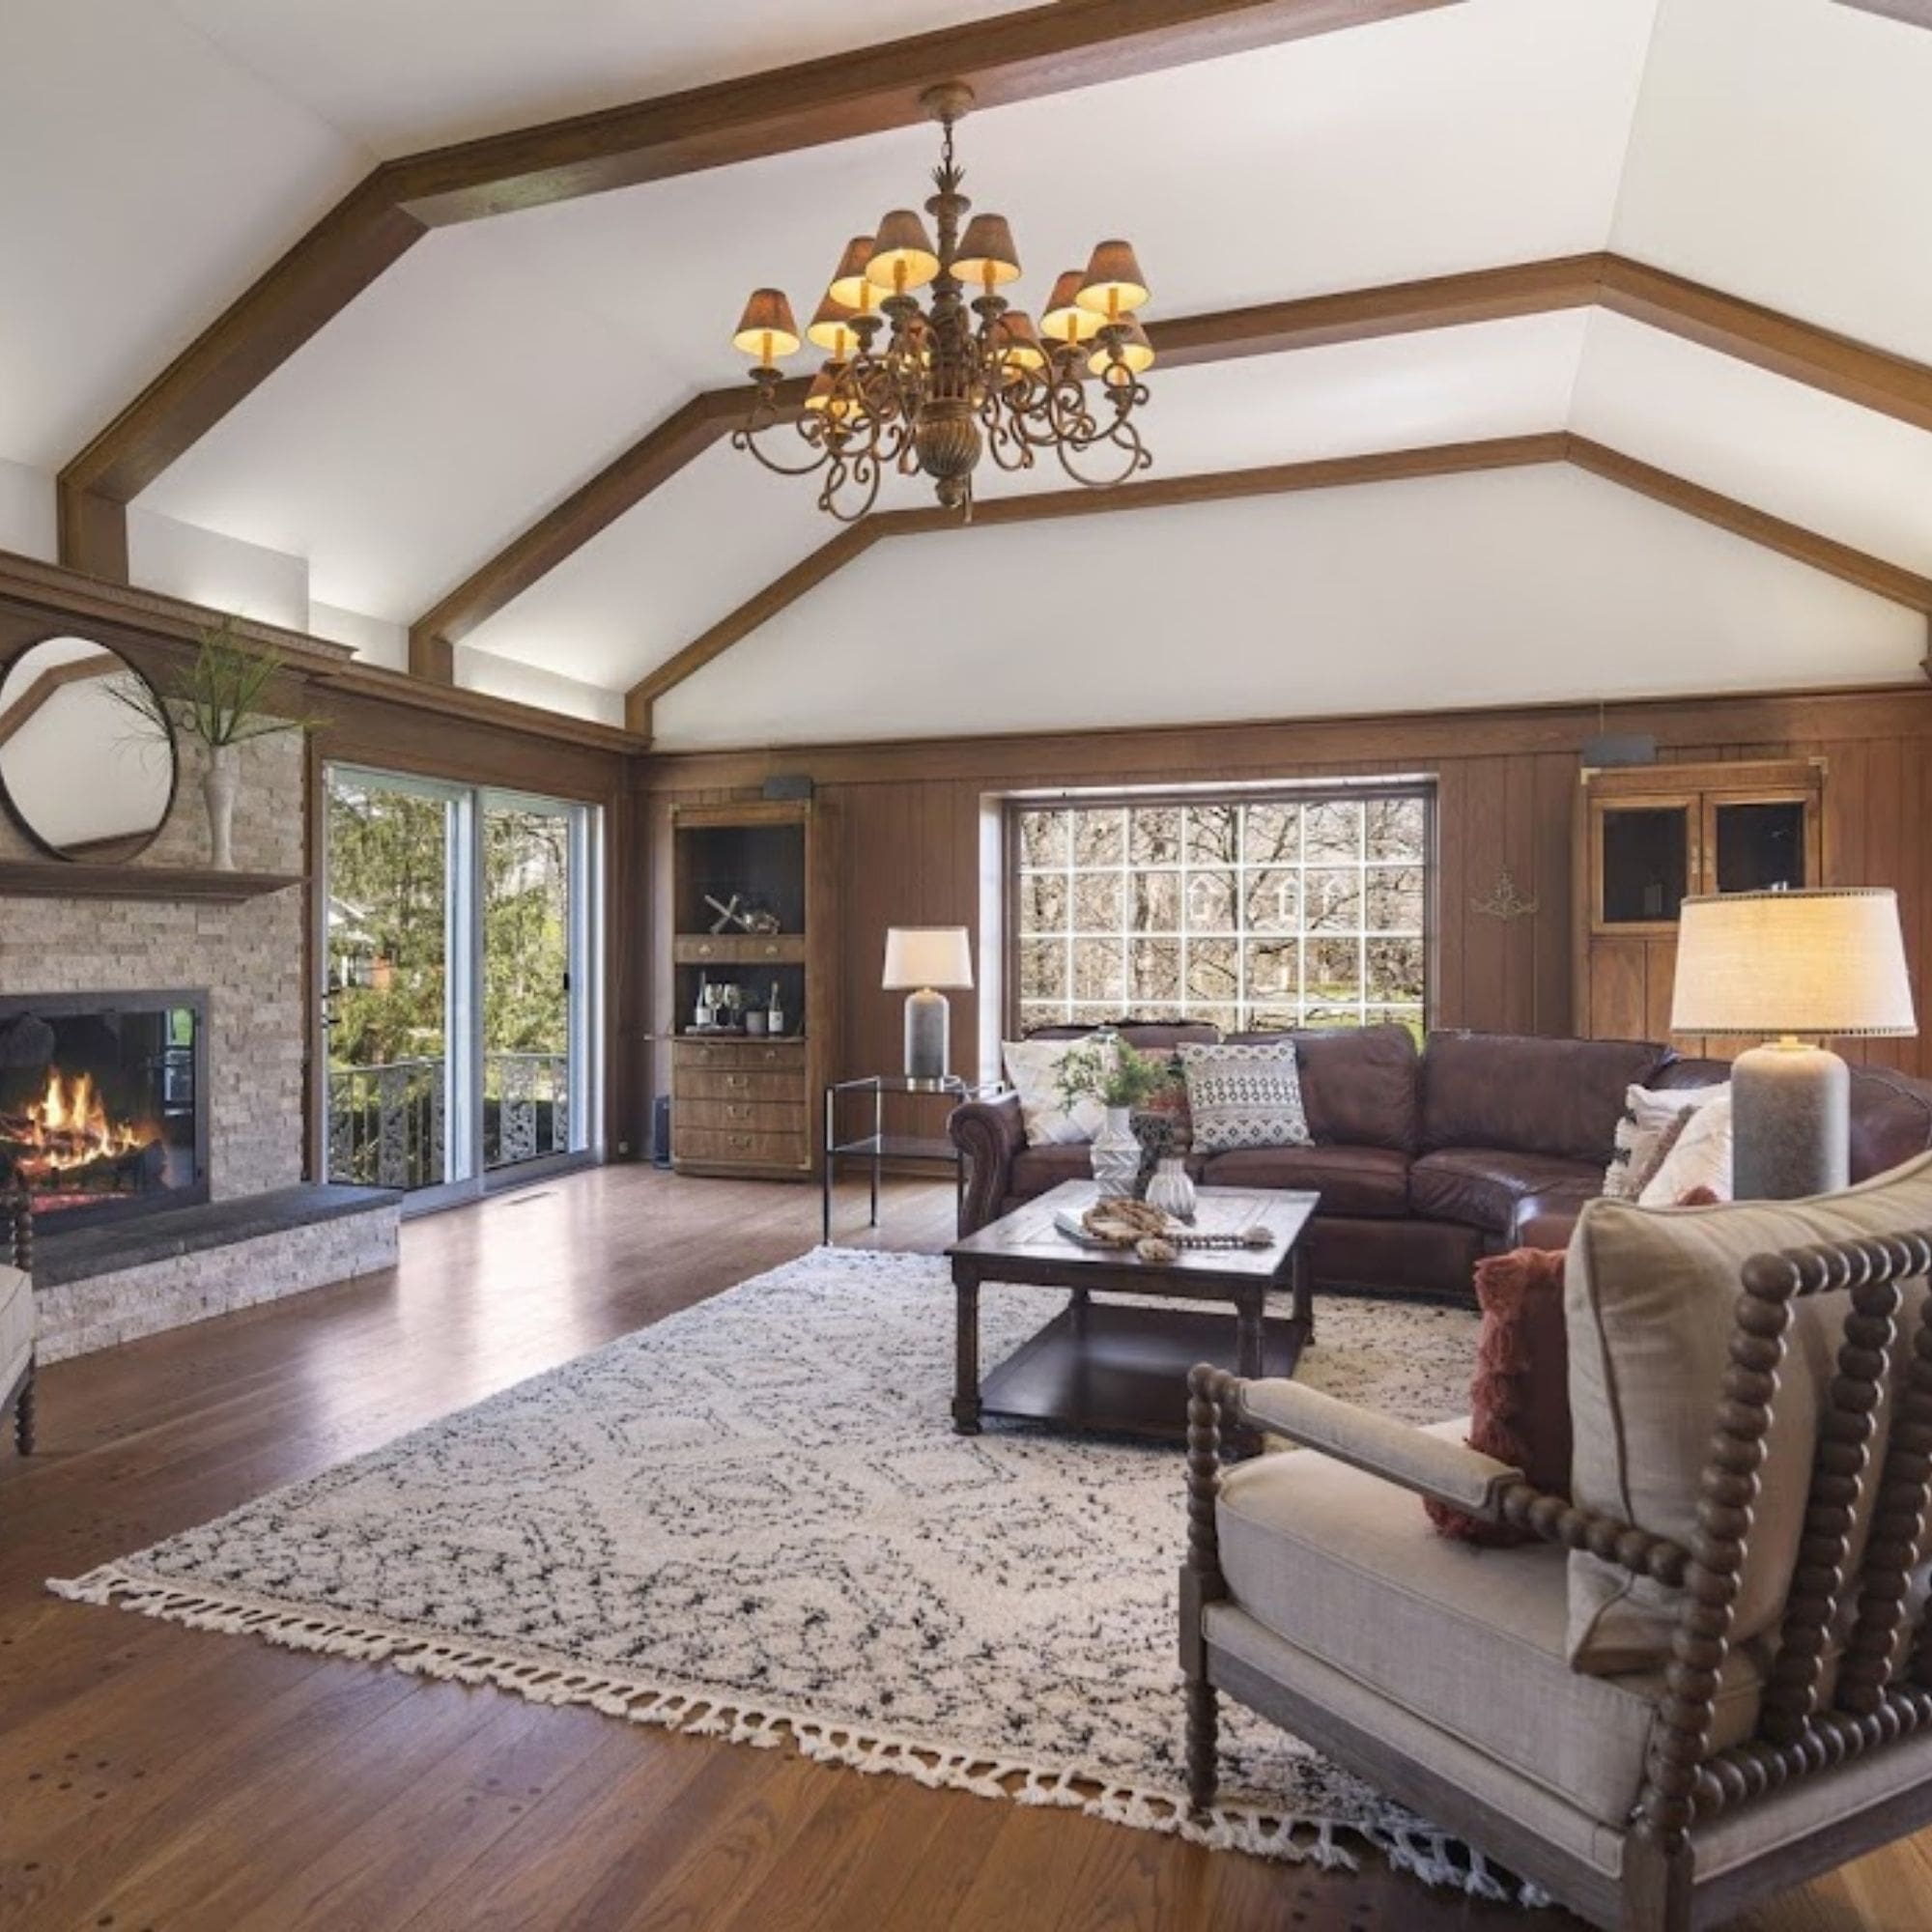  Warm and inviting home staged living room with a fireplace and wood paneling.